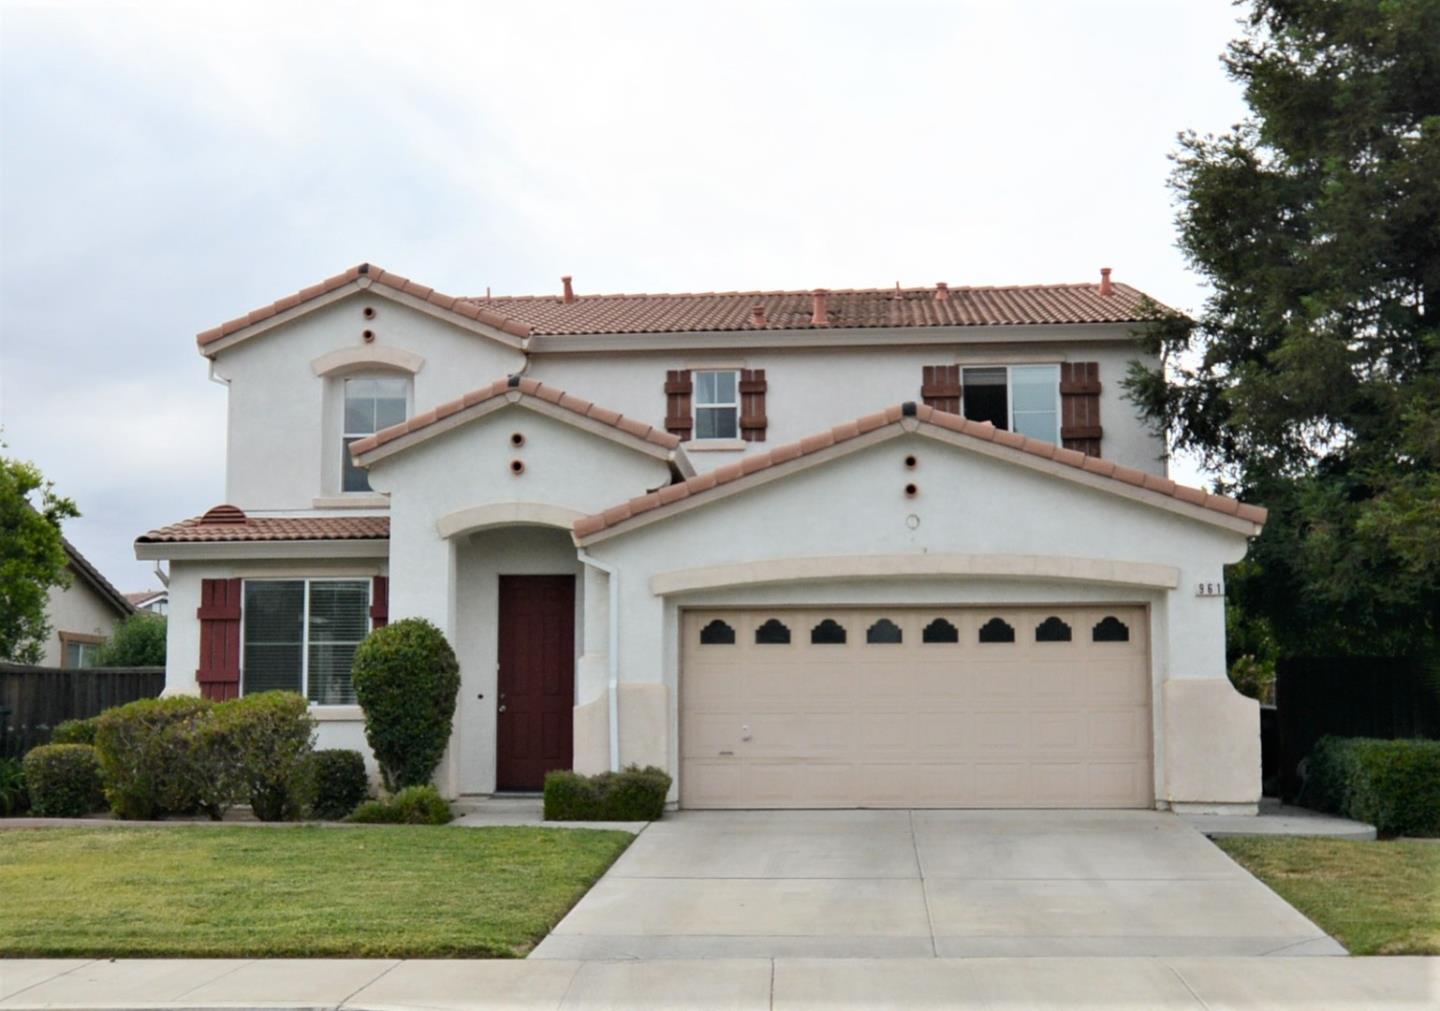 Photo of 961 Windsong Dr in Tracy, CA